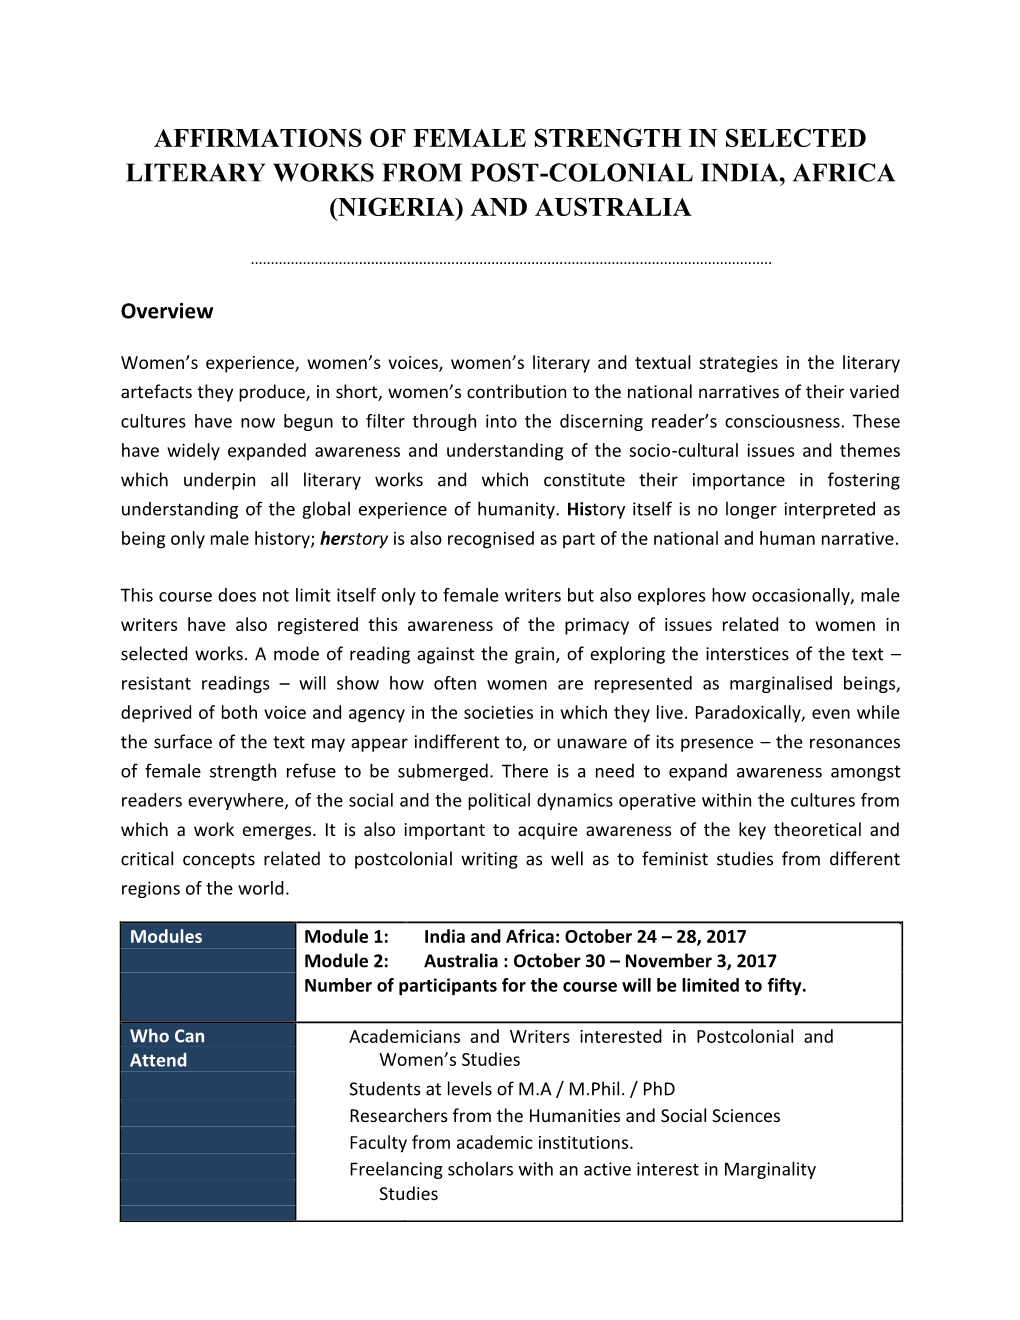 Affirmations of Female Strength in Selected Literary Works from Post-Colonial India, Africa (Nigeria) and Australia